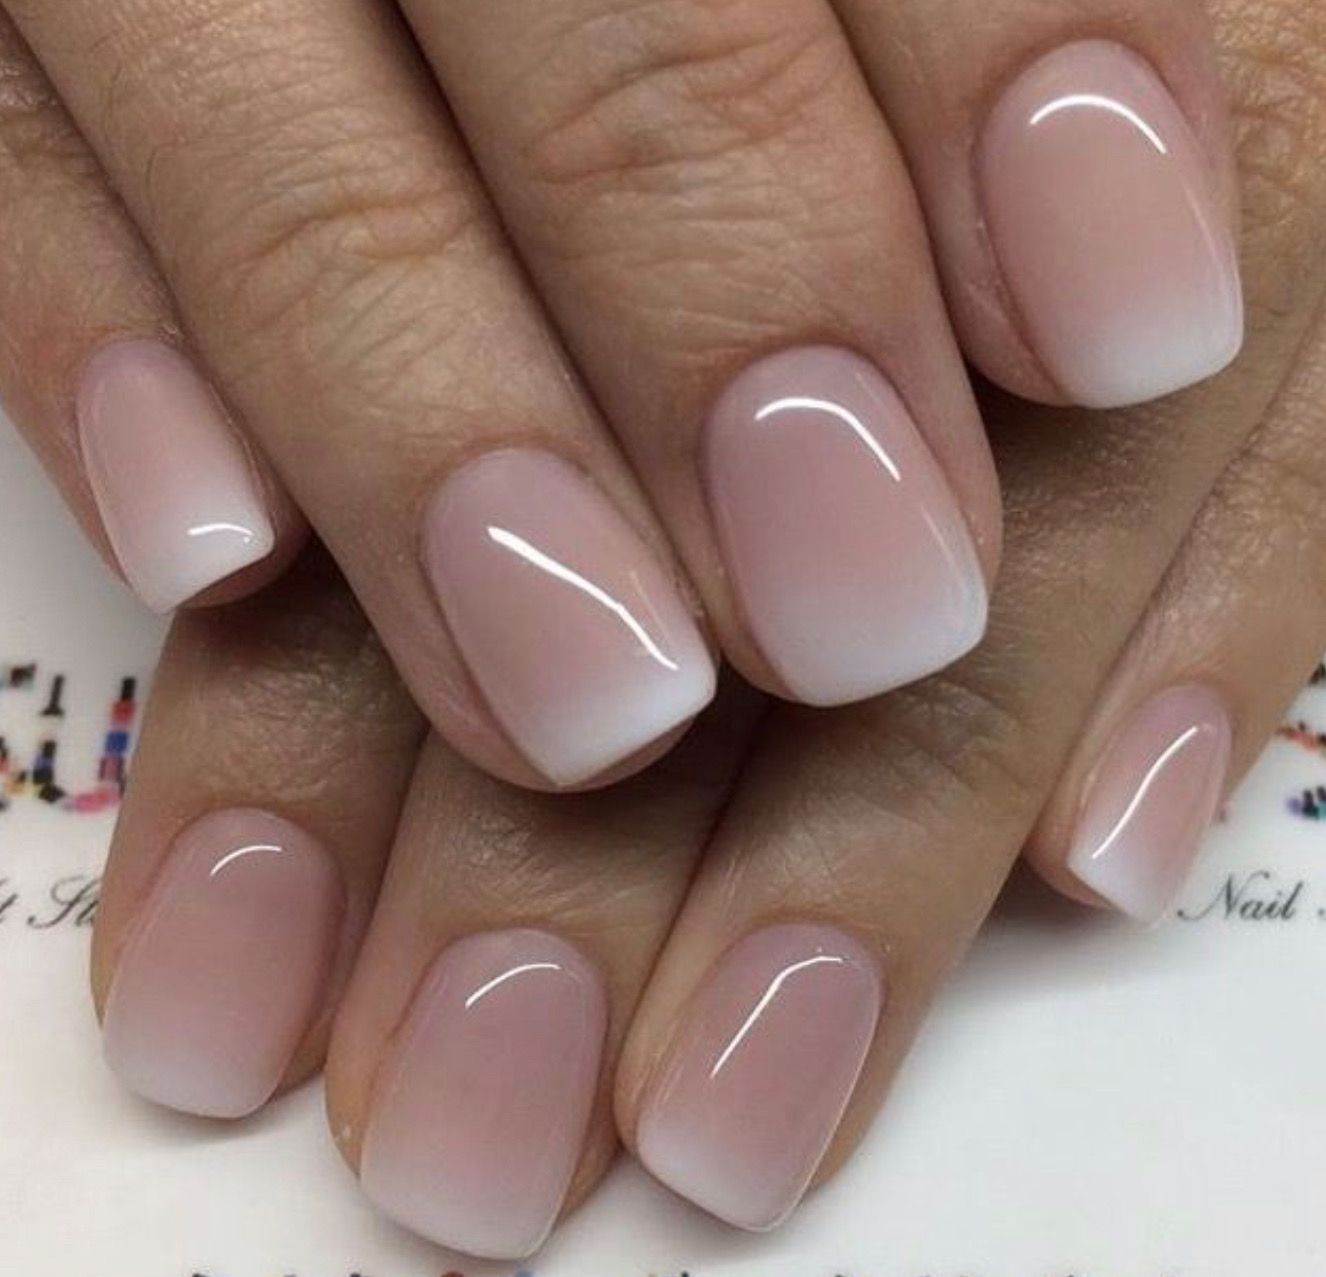 Pin By Berenyqa On My Girlie Stuff Light Colored Nails Wedding Nails French Trendy Nails